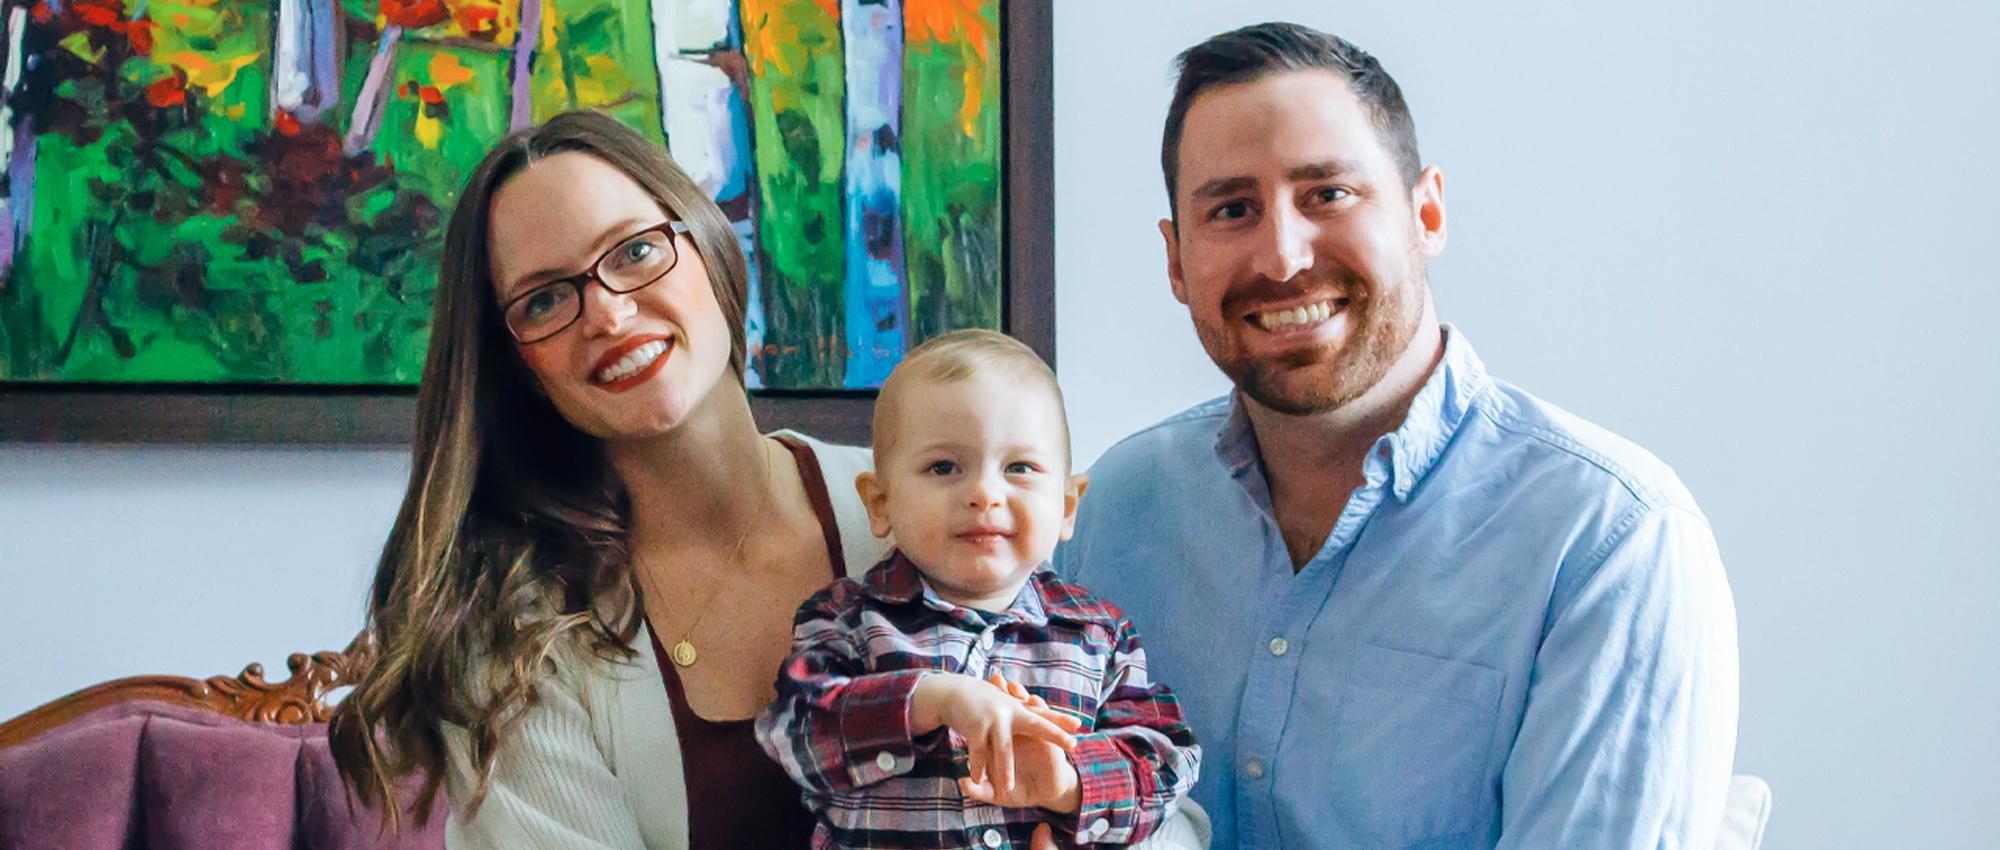 Featured image of blood donor and a registered organ donor Greg Kitchen along with wife Deanna Kitchen and son Cole Kitchen sitting on the sofa in front of a painting in their house.